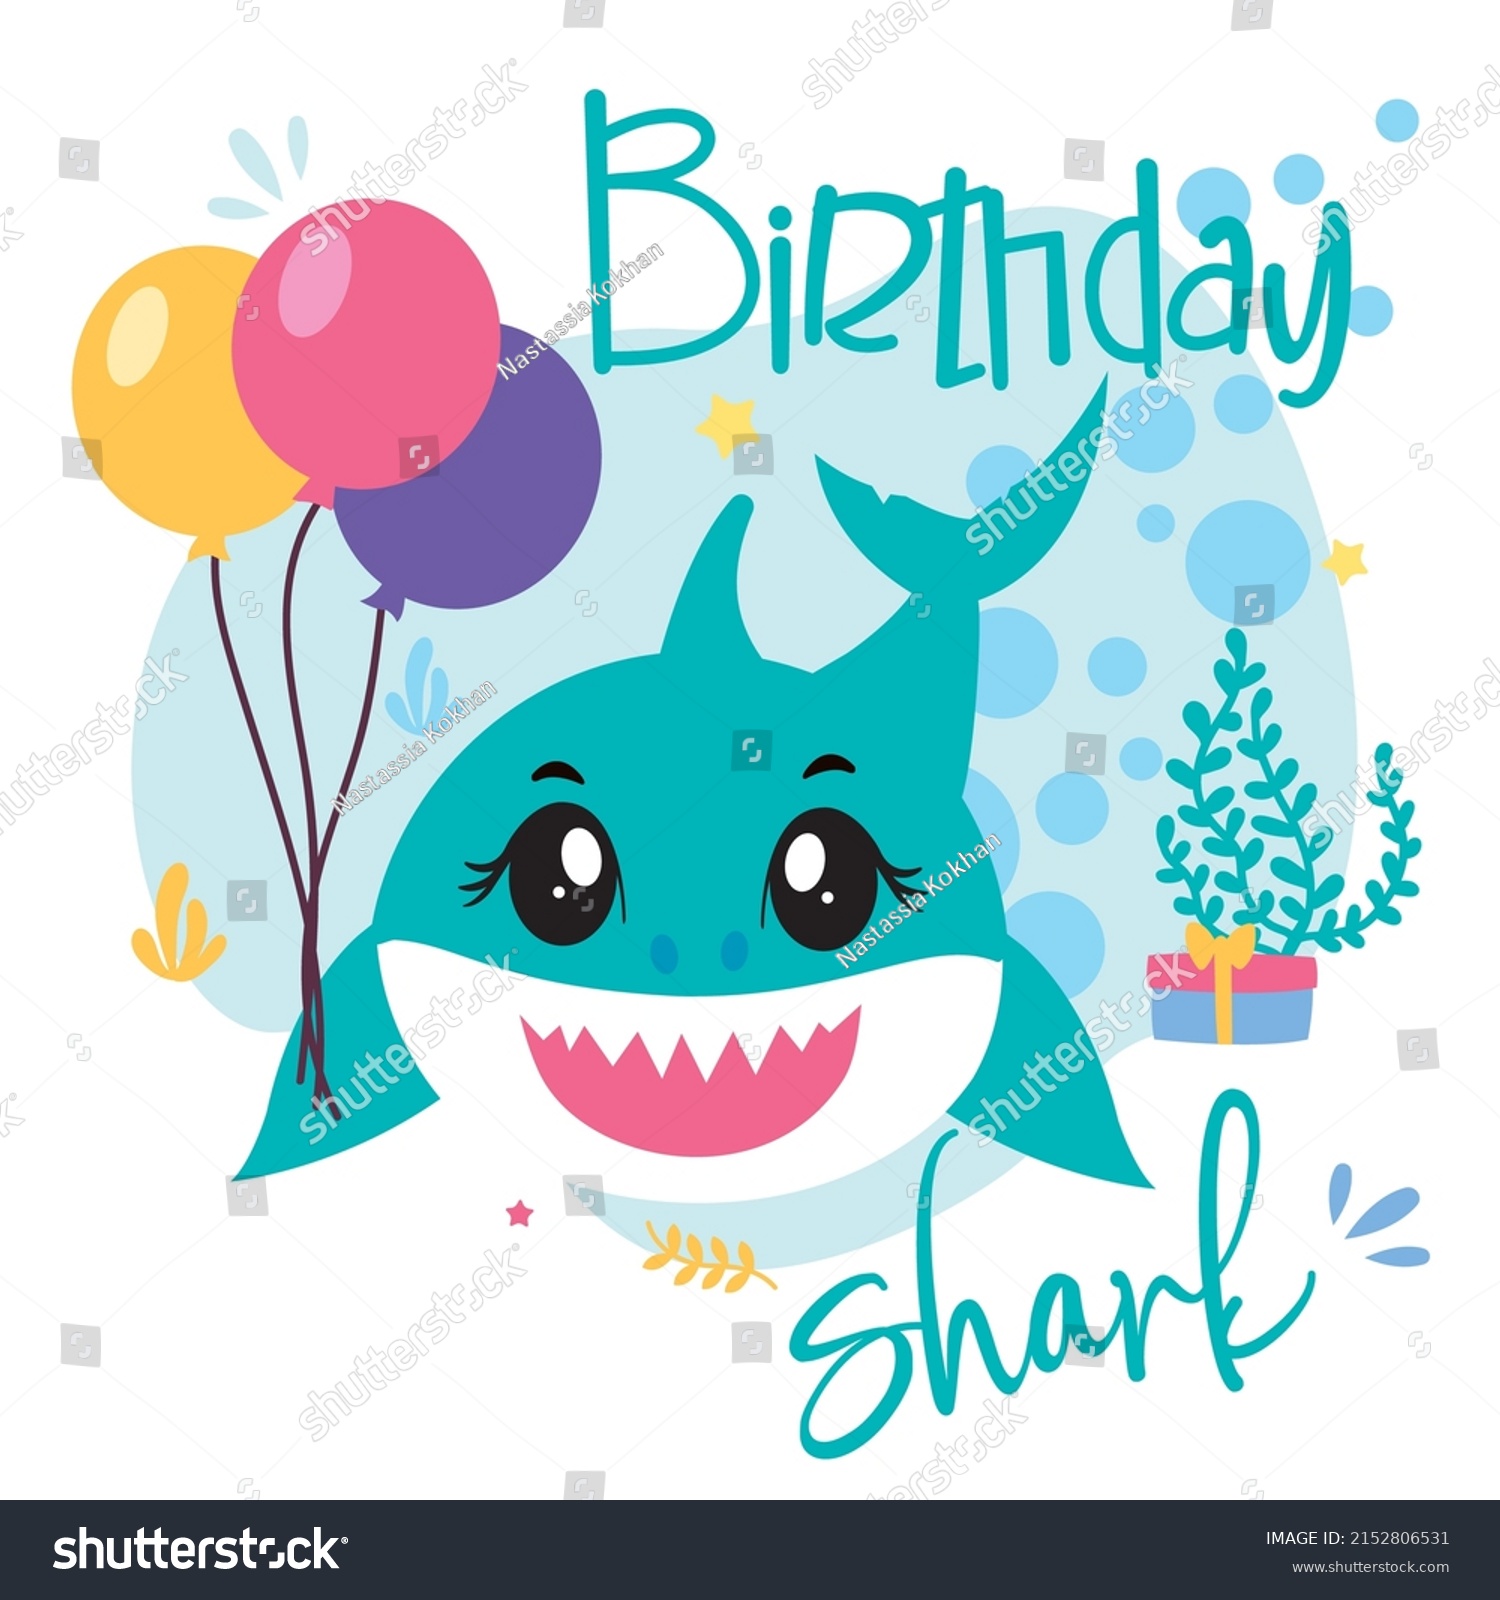 SVG of Birthday shark with balloons svg vector Illustration isolated on white background. Baby shark birthday shirt design. Shark printable svg